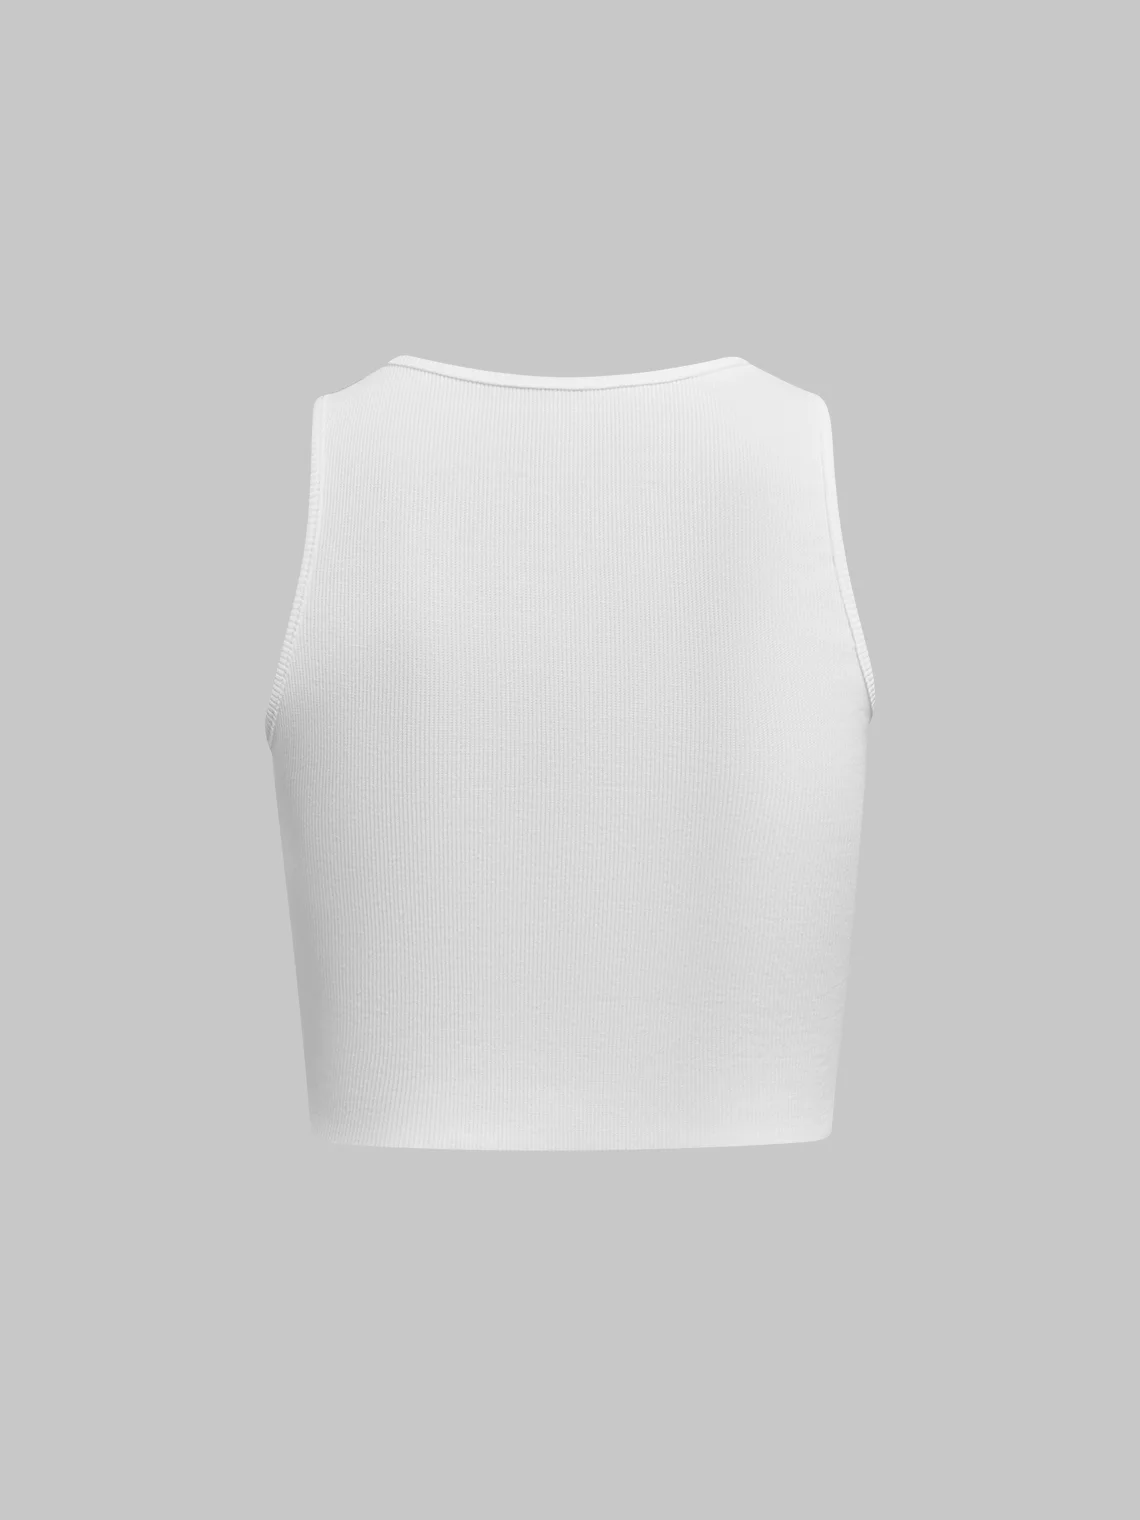 【Final Sale】Y2K White Letter Cropped Top Tank Top & Cami Future Millionaire